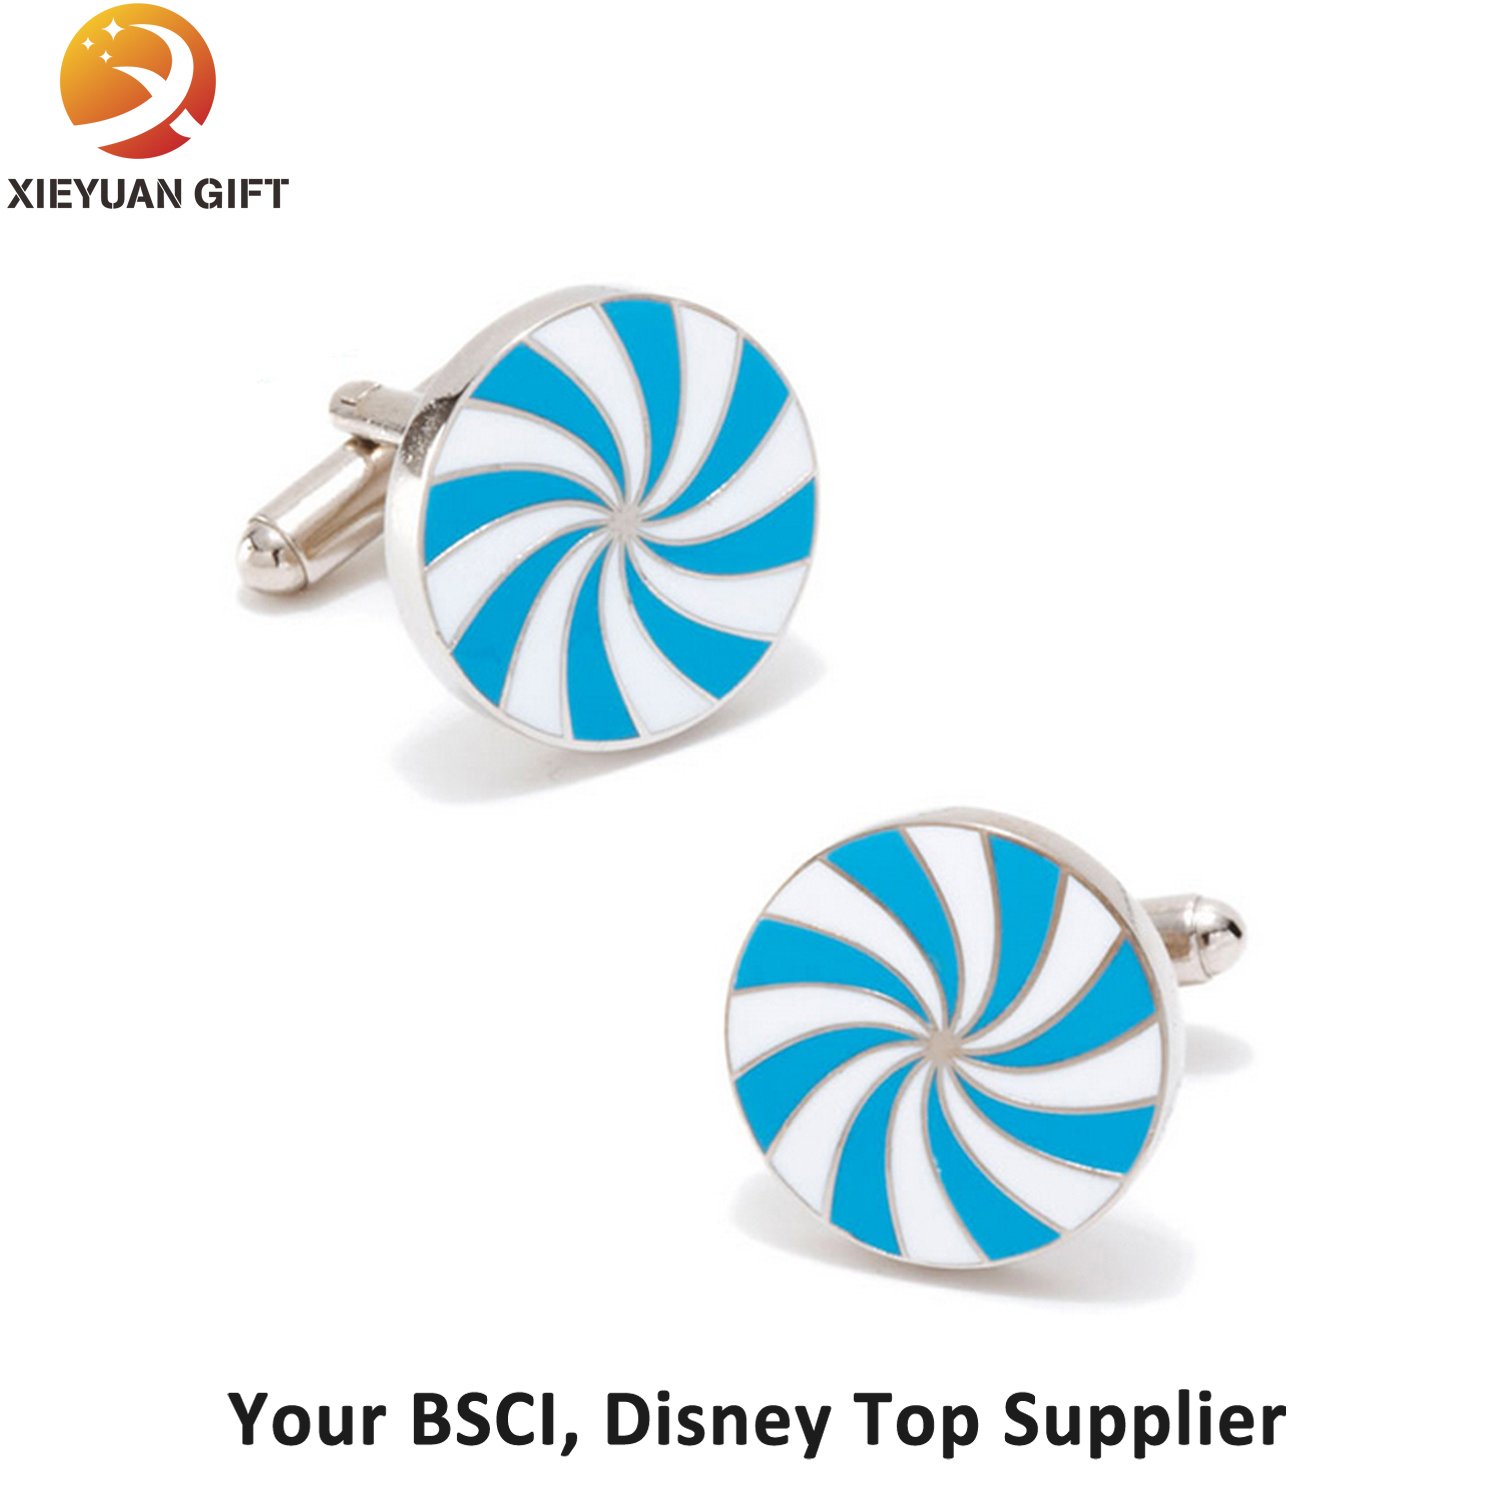 Soft Enamel Process Stainless Steel Cufflink for Gifts